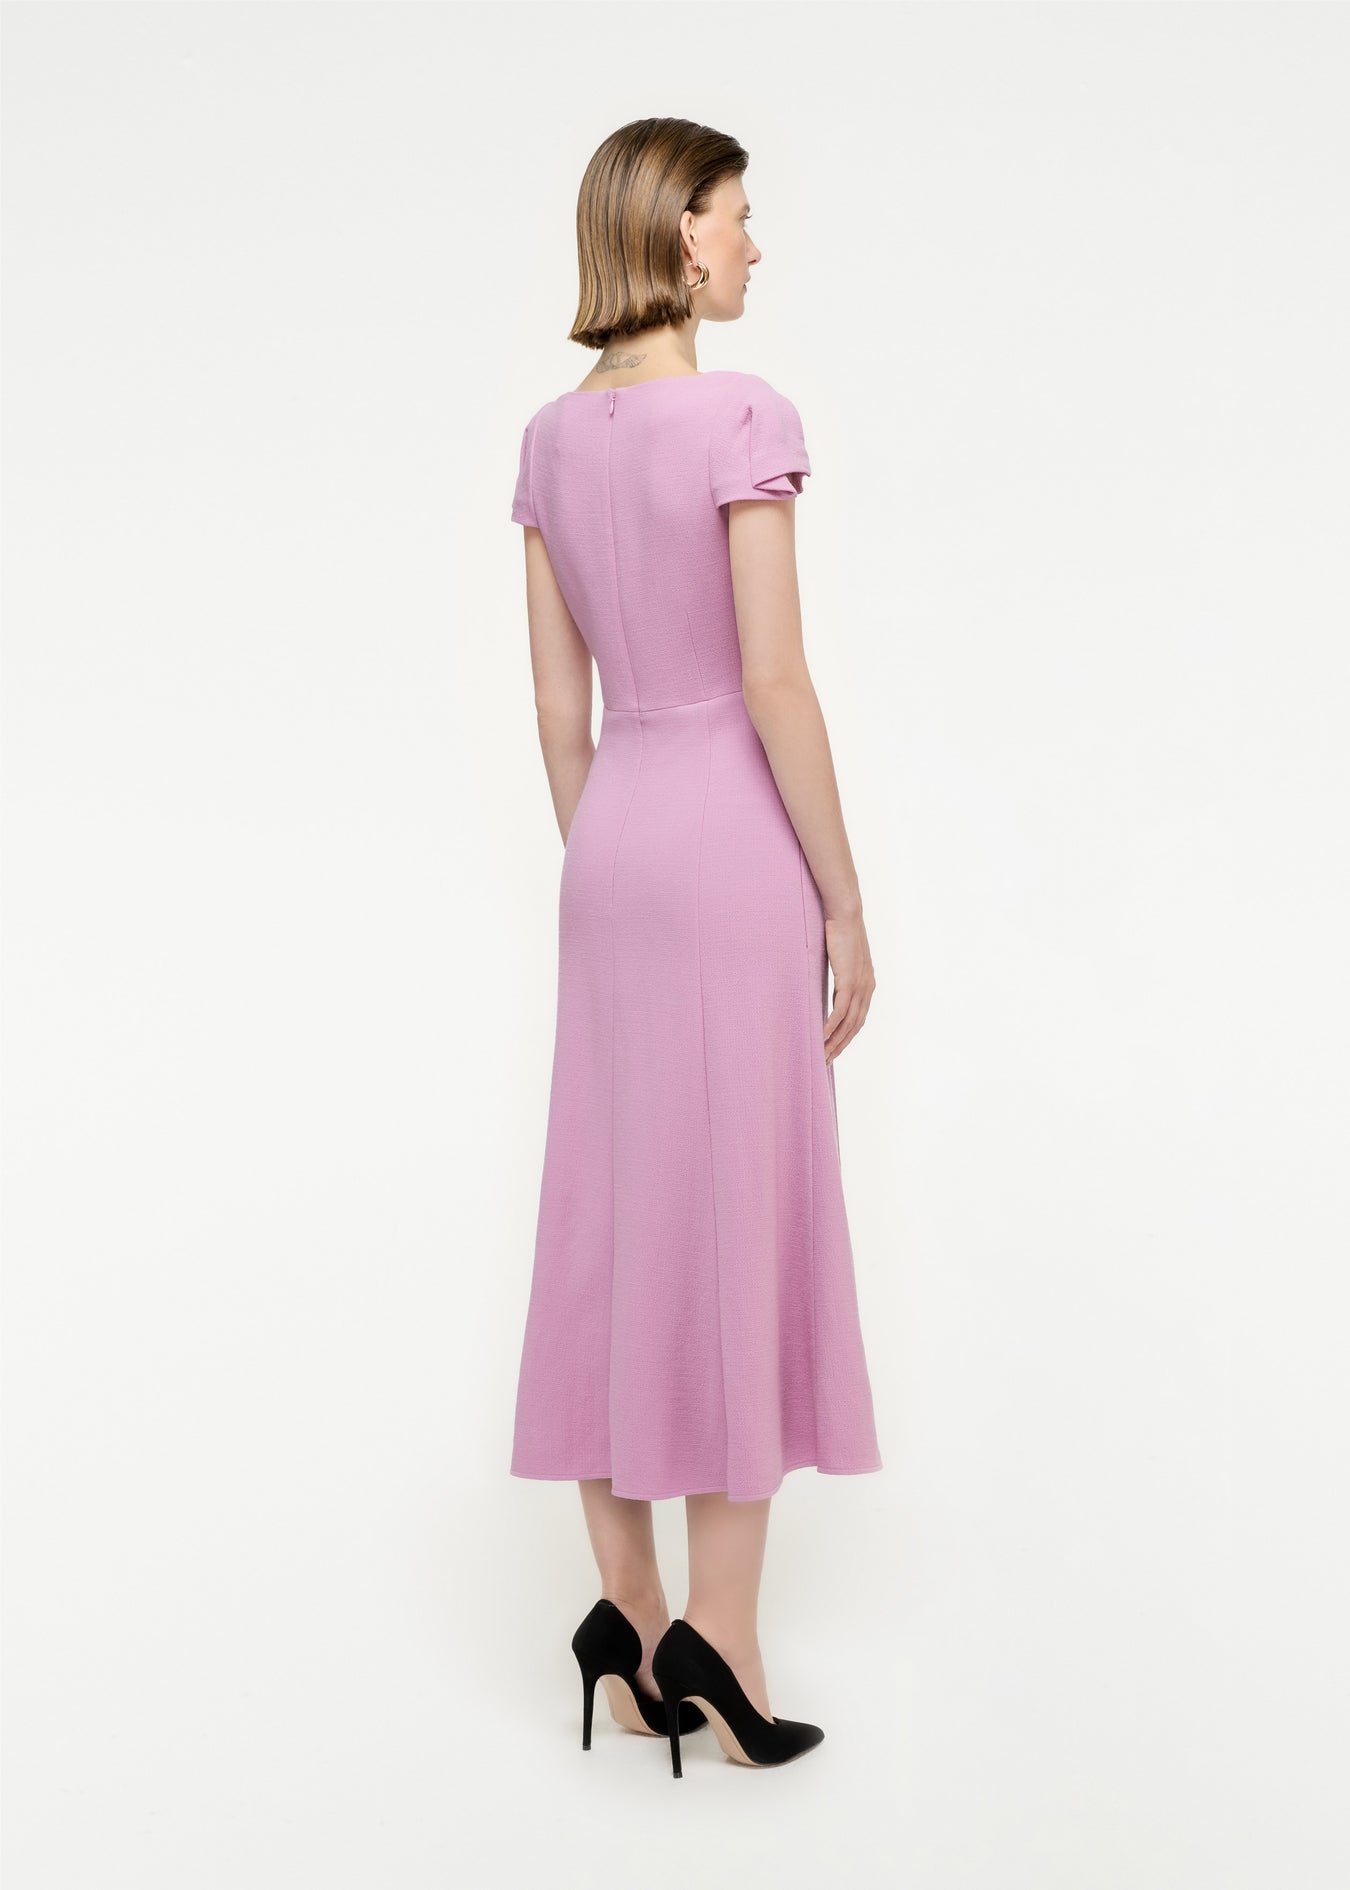 The back of a woman wearing the Cap Sleeve Wool Crepe Midi Dress in Pink